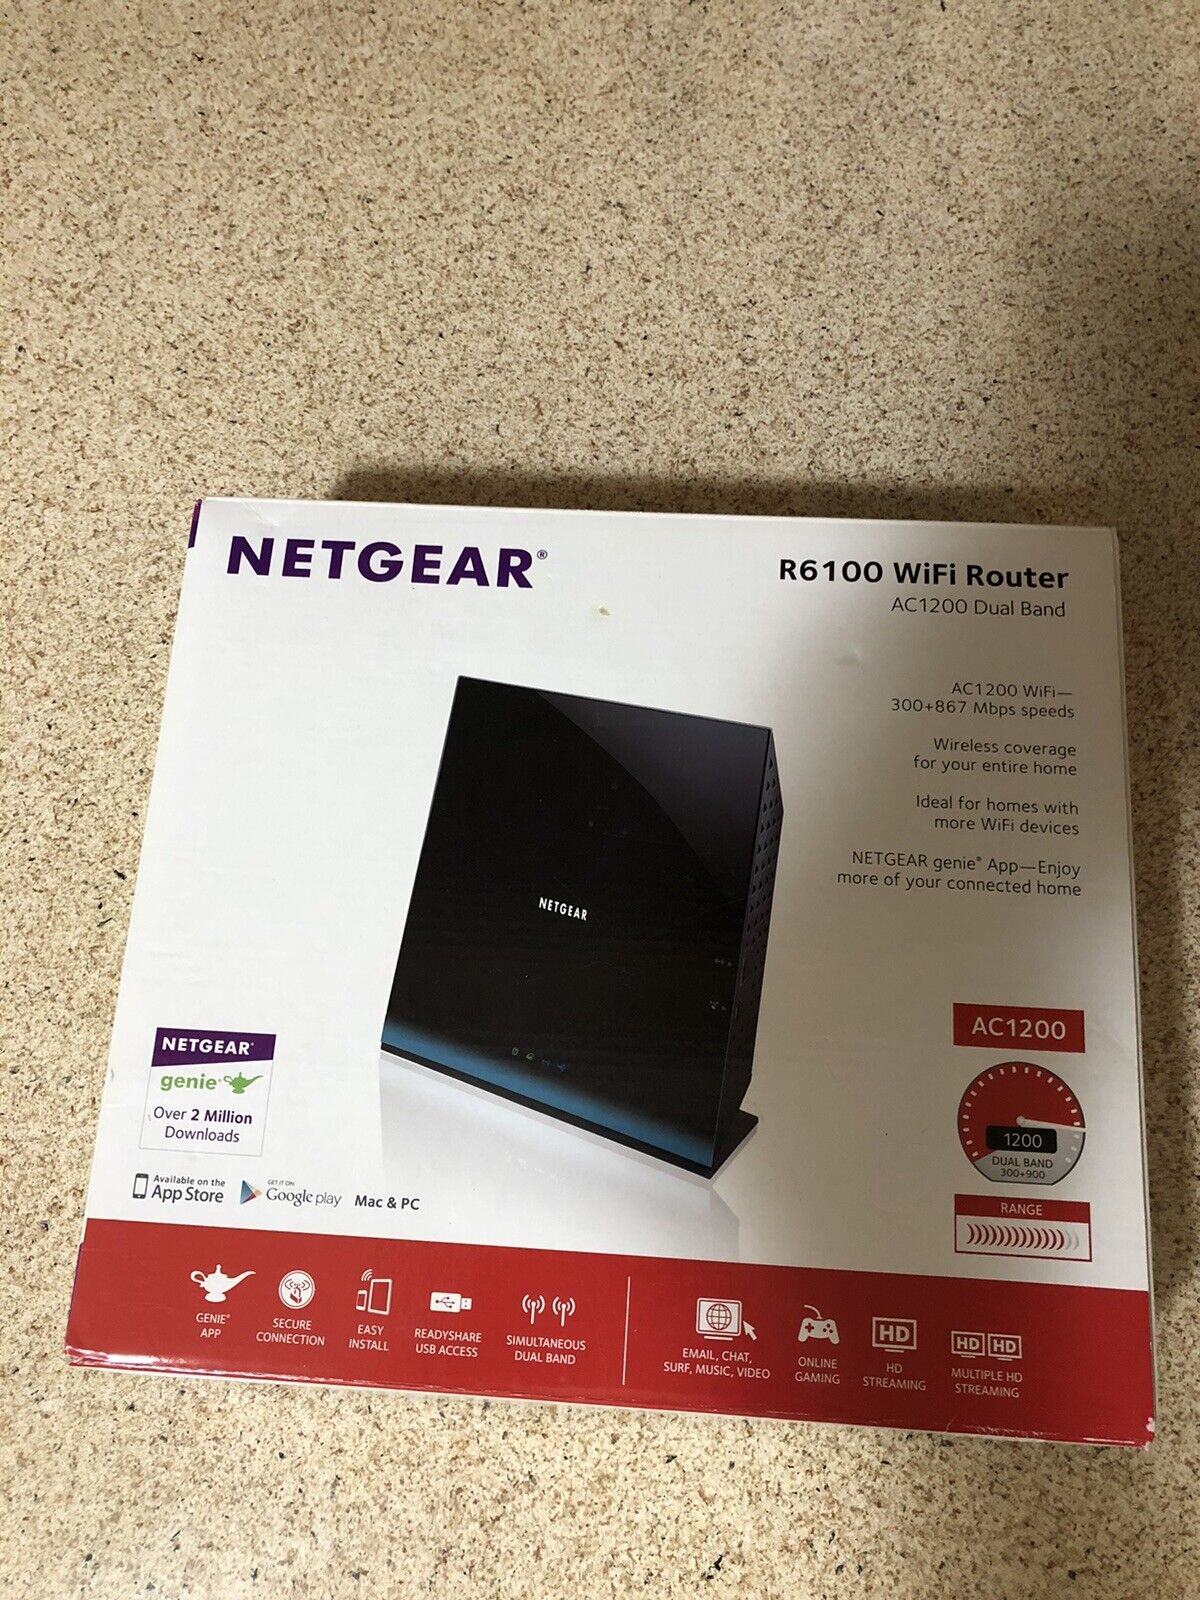 Netgear R6100 AC1200 Dual Band Wi-Fi Router - Preowned Clean Nice Tested